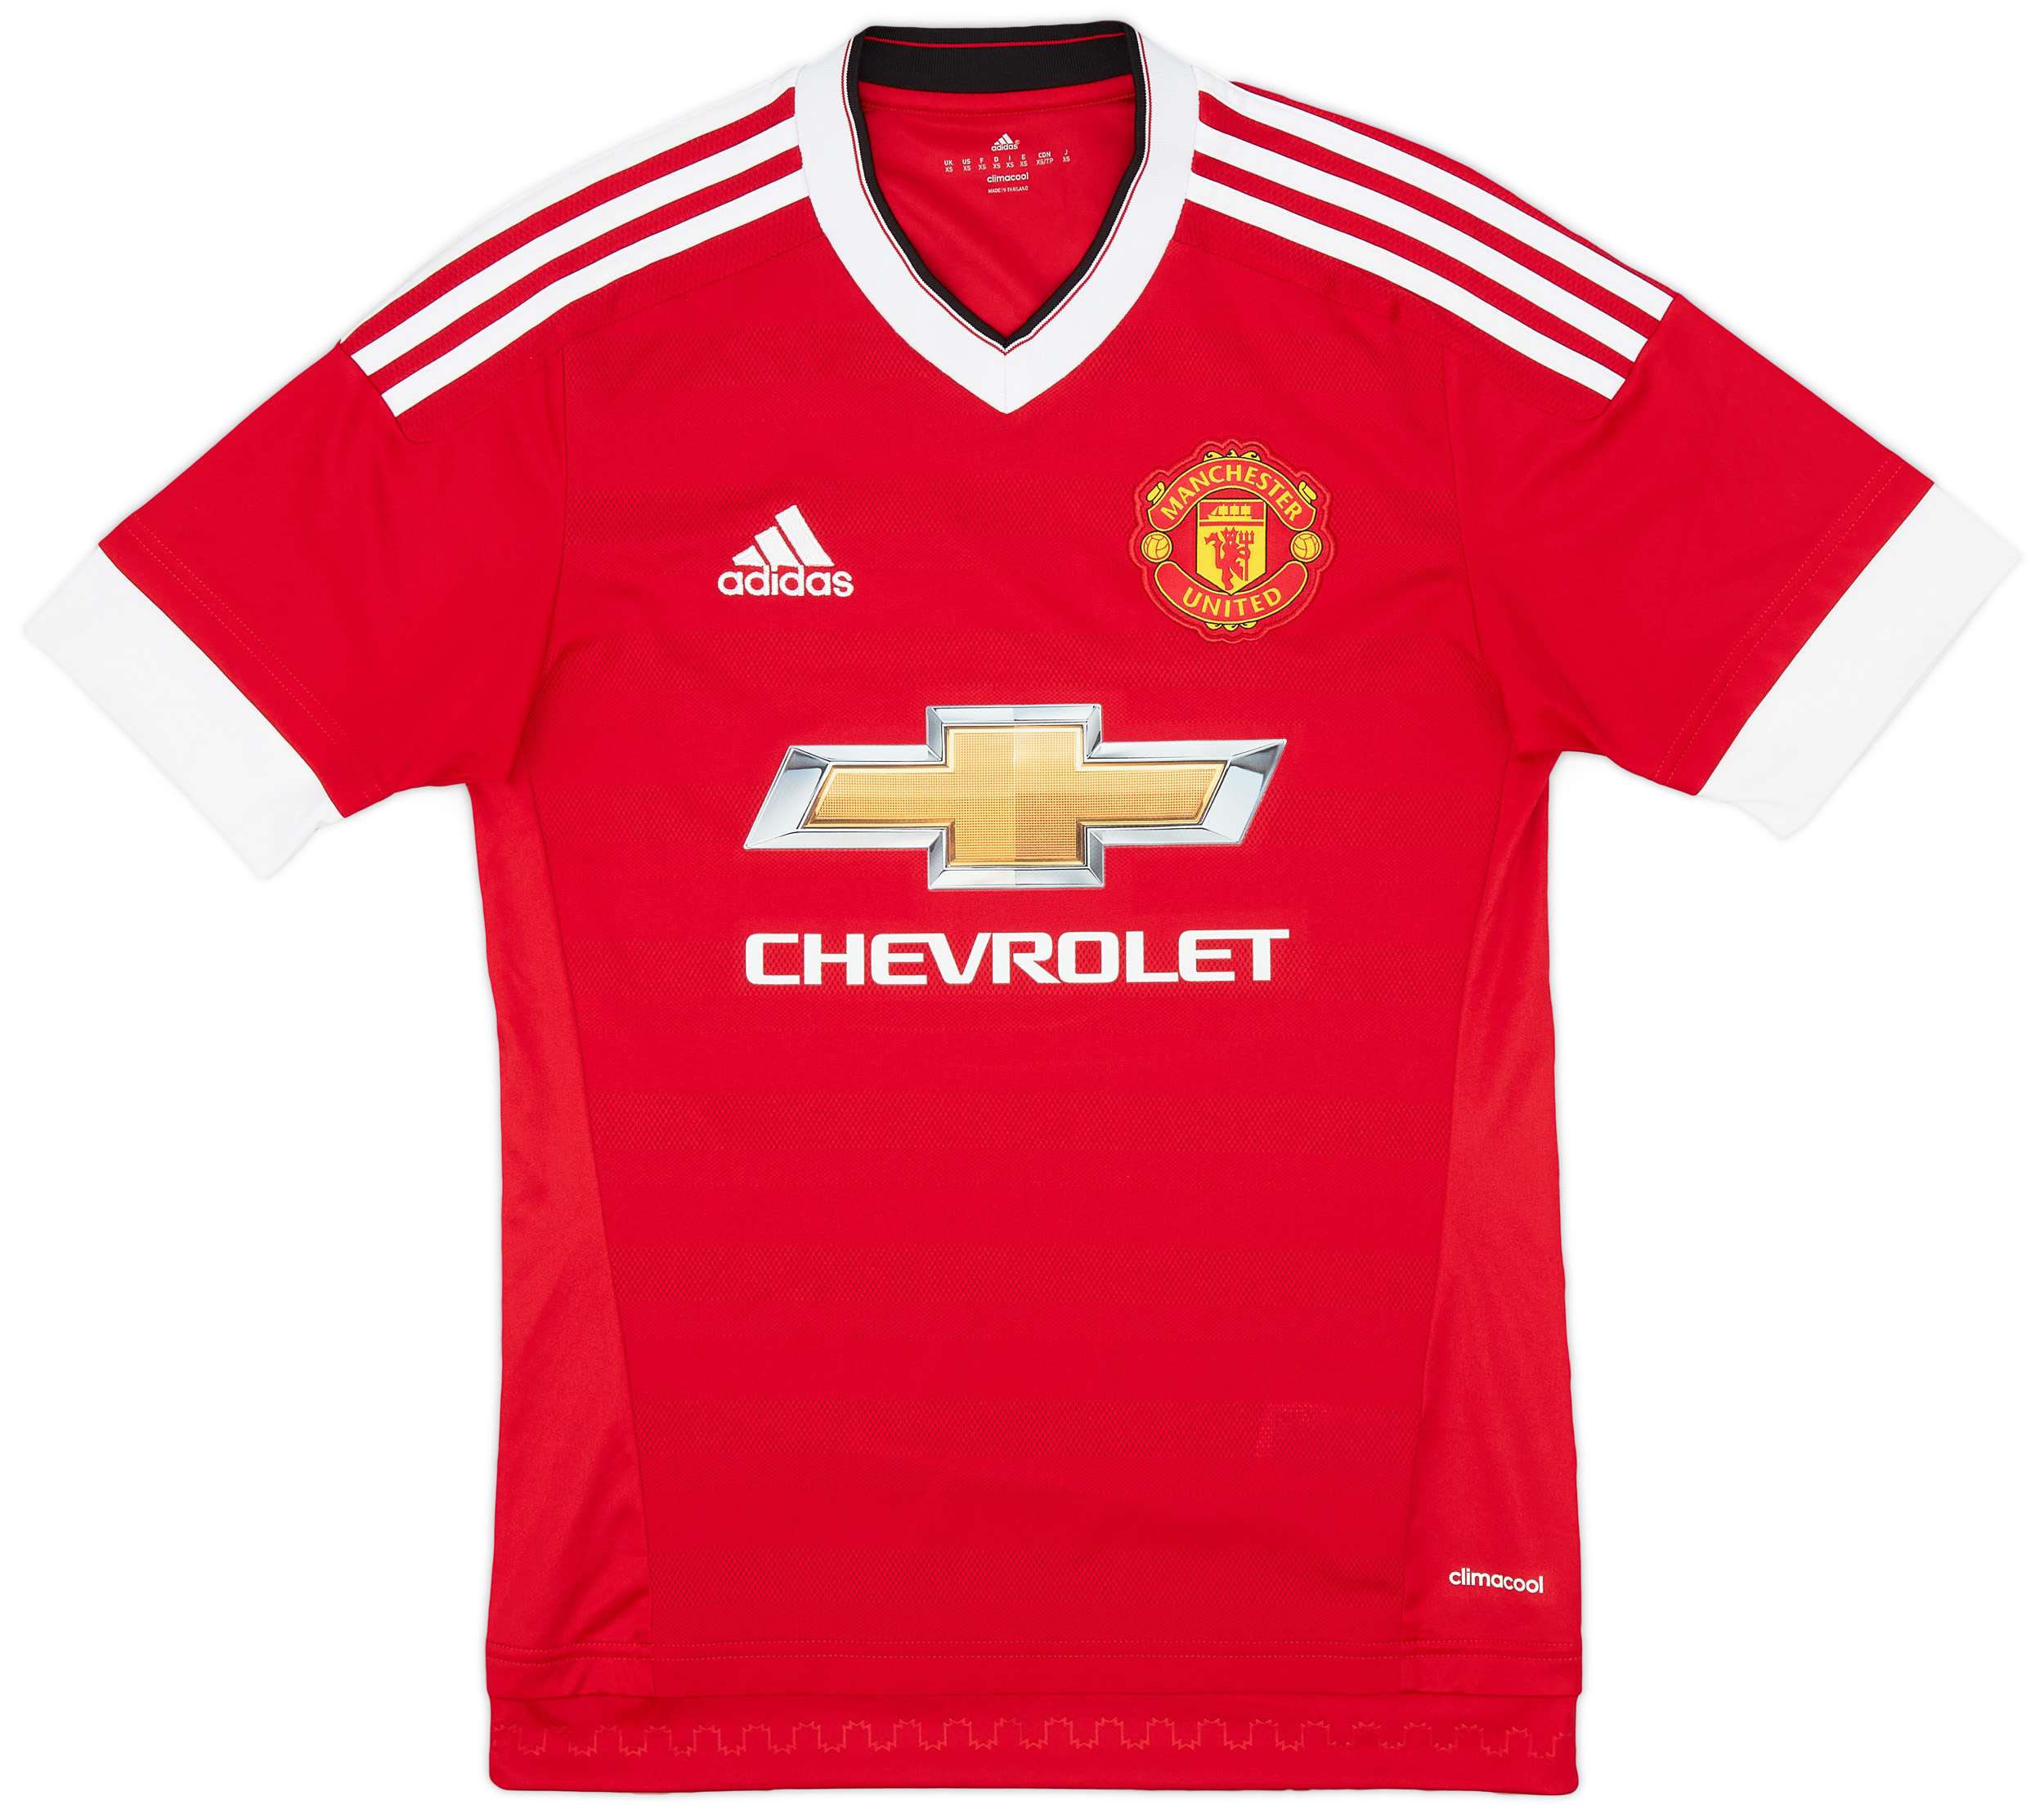 2015-16 Manchester United Home Shirt - 10/10 - ()